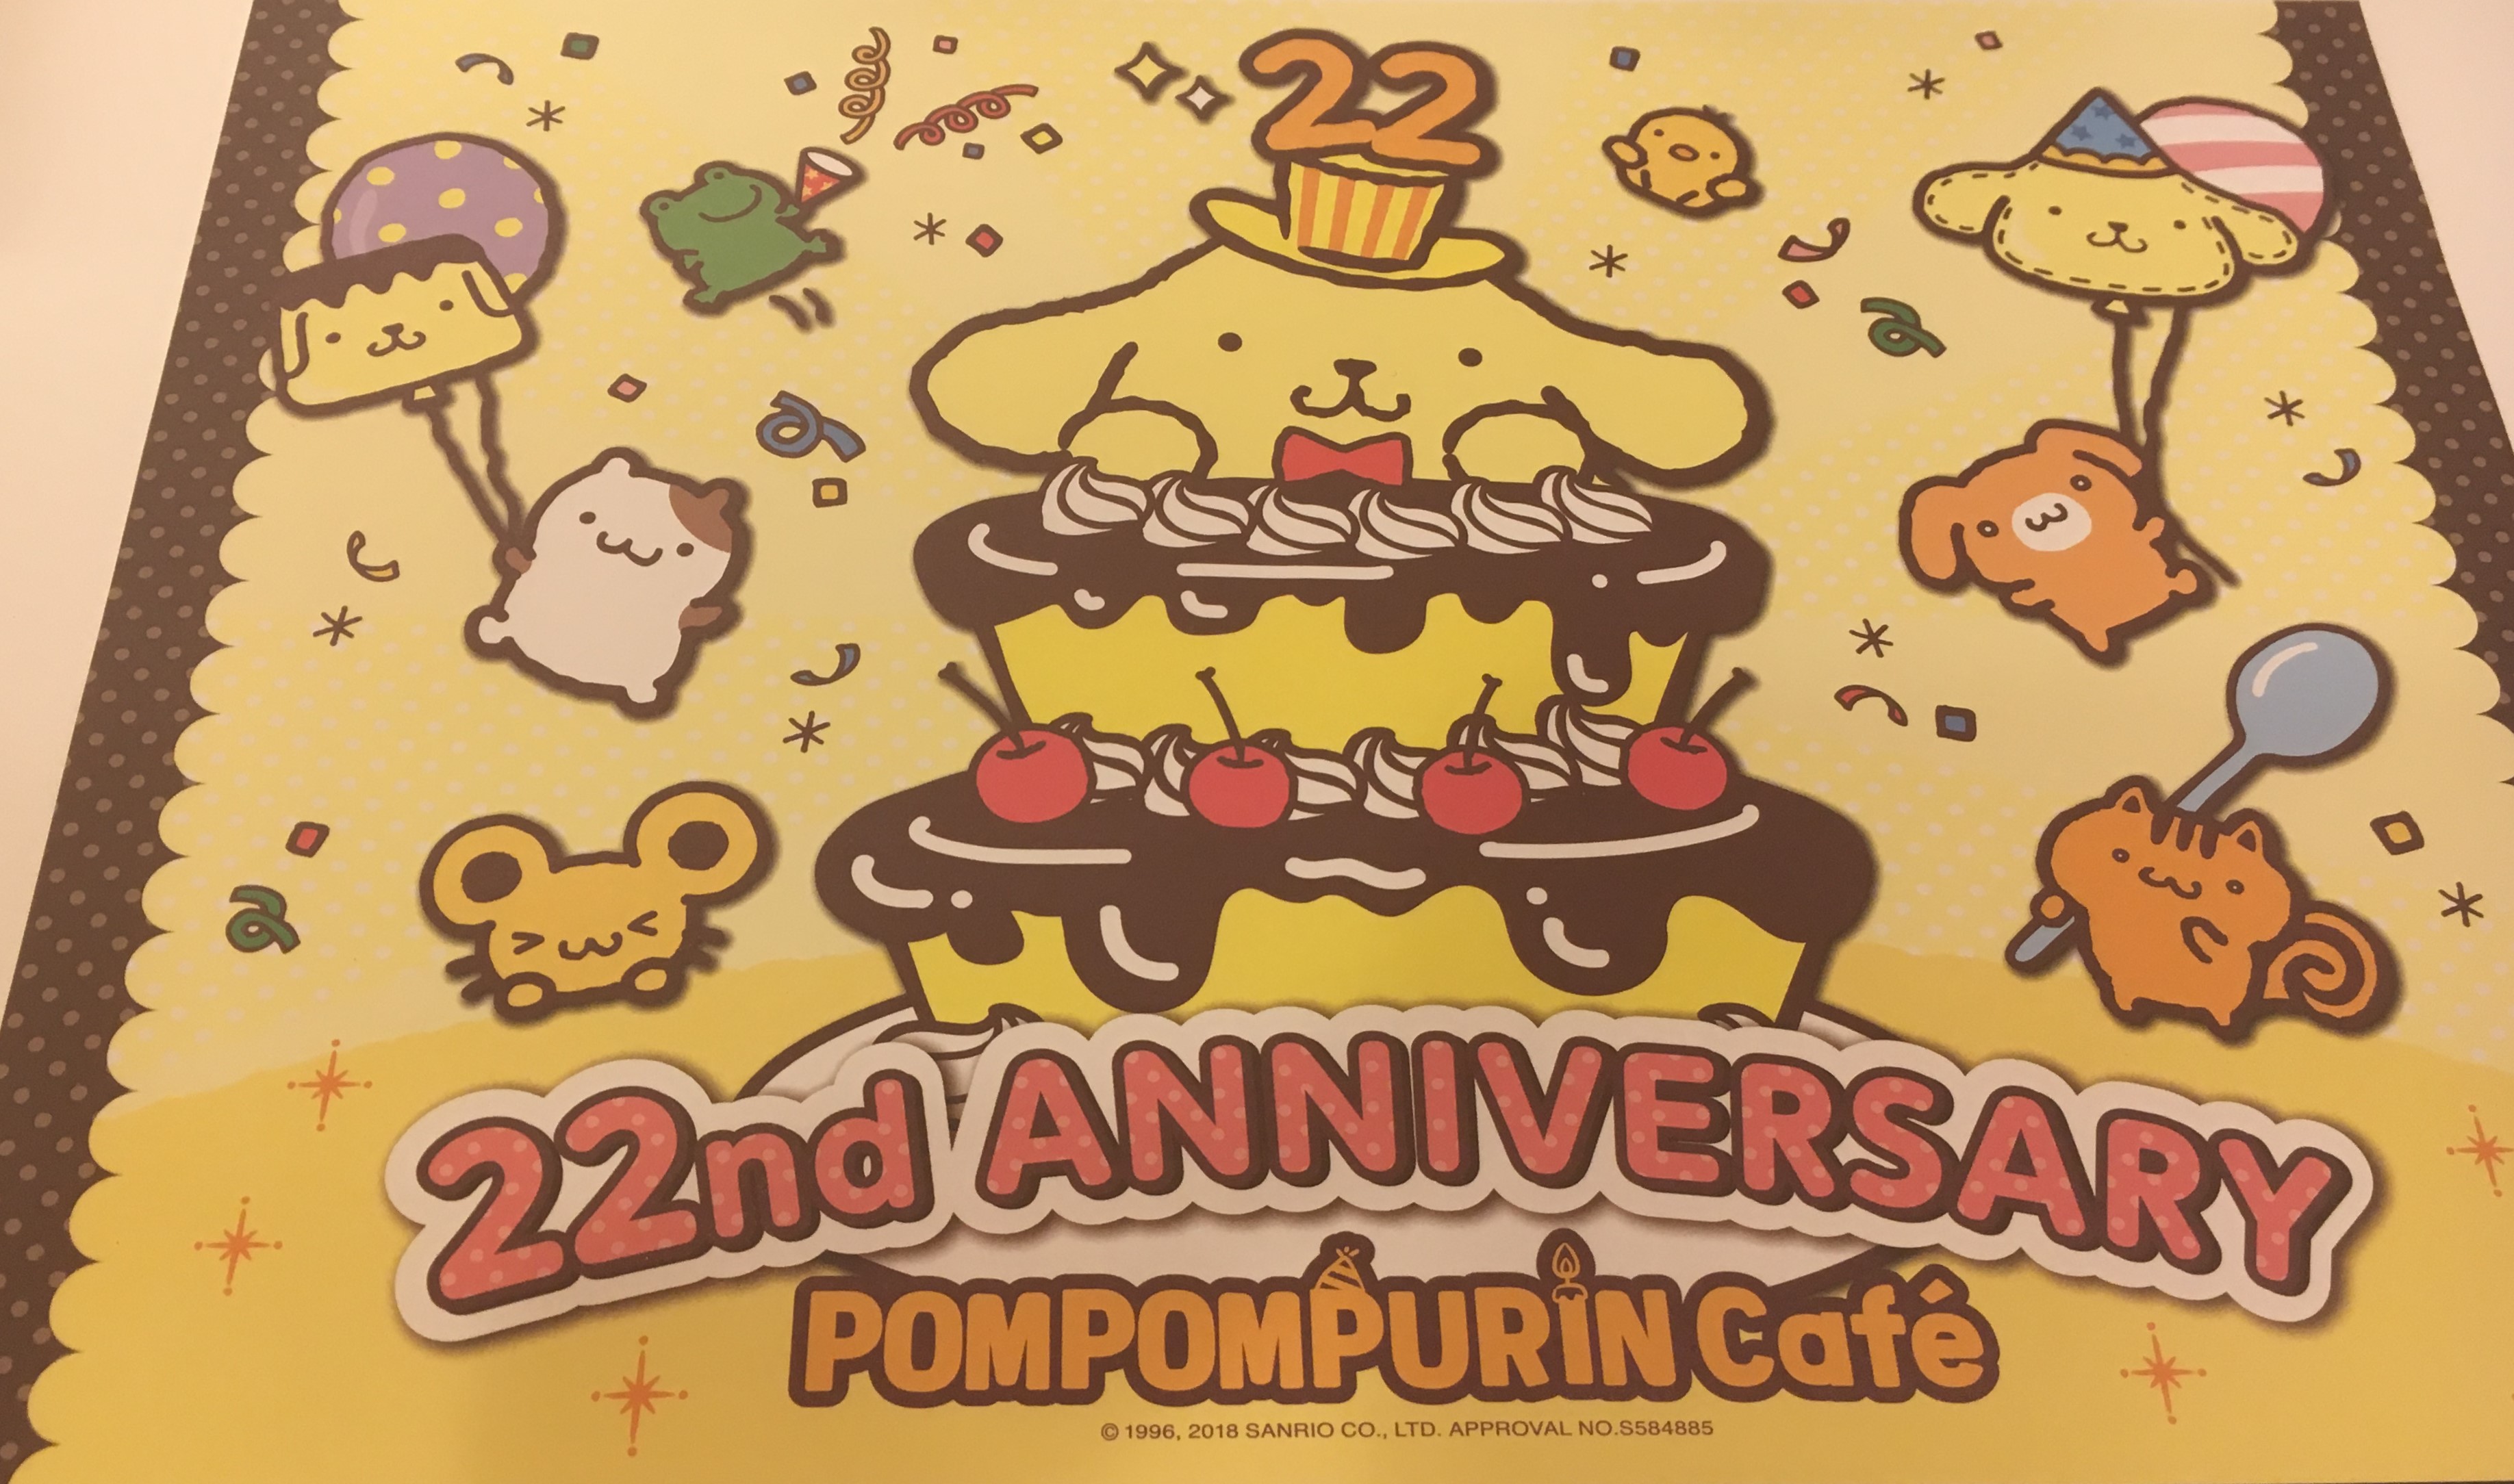 22nd anniversary placemat of the pompompurin cafe